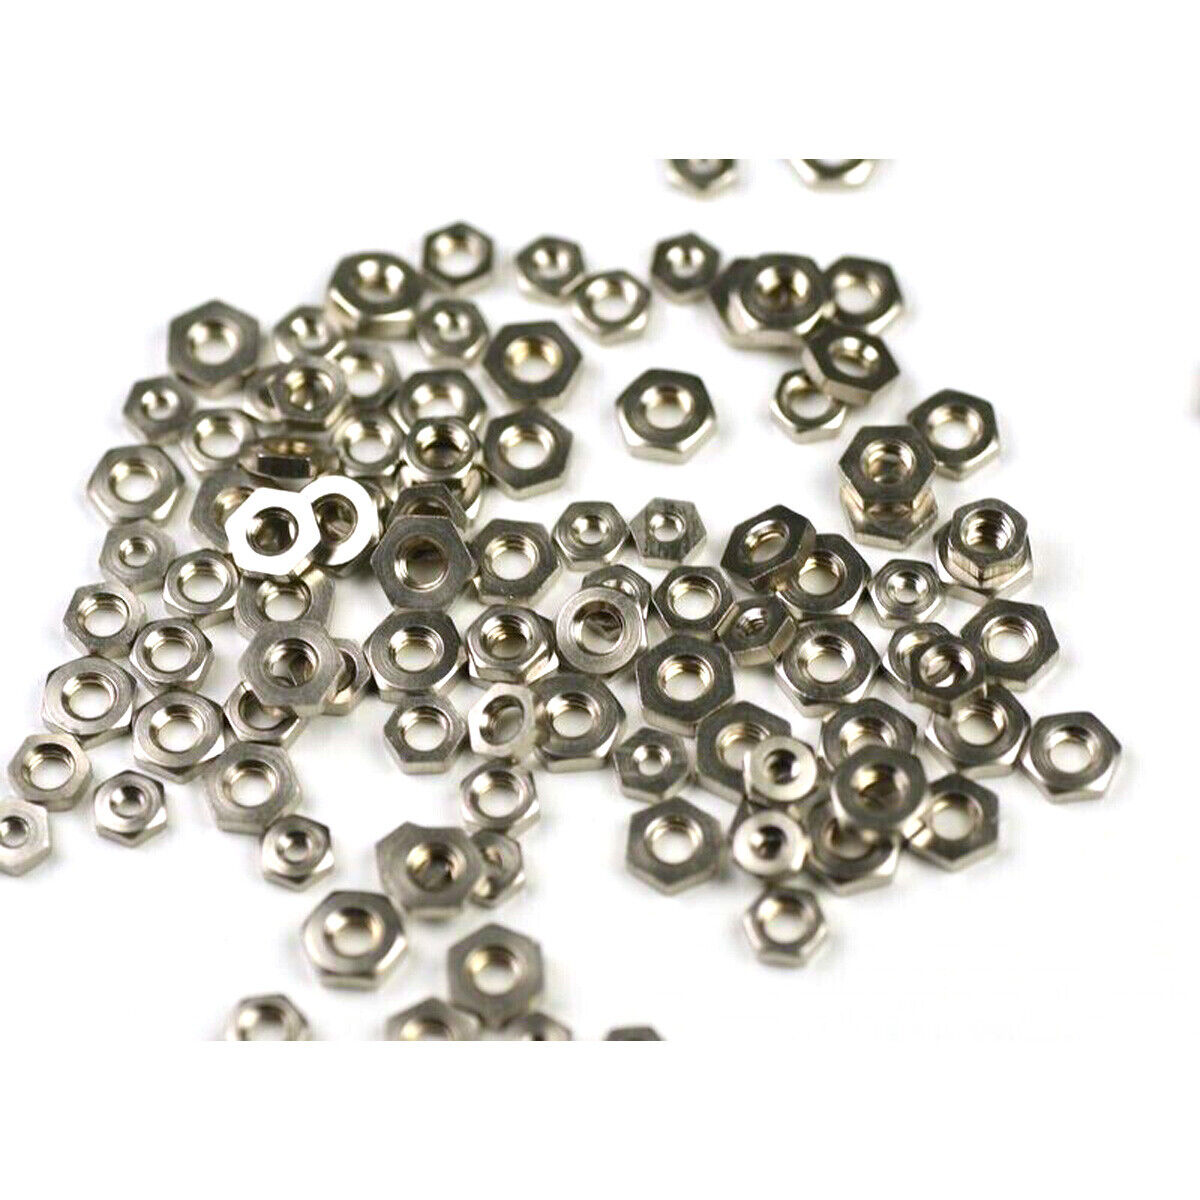 100x Nickelled CLOCK NUTS ASSORTED clockmakers spares repairs 3-7mm movement